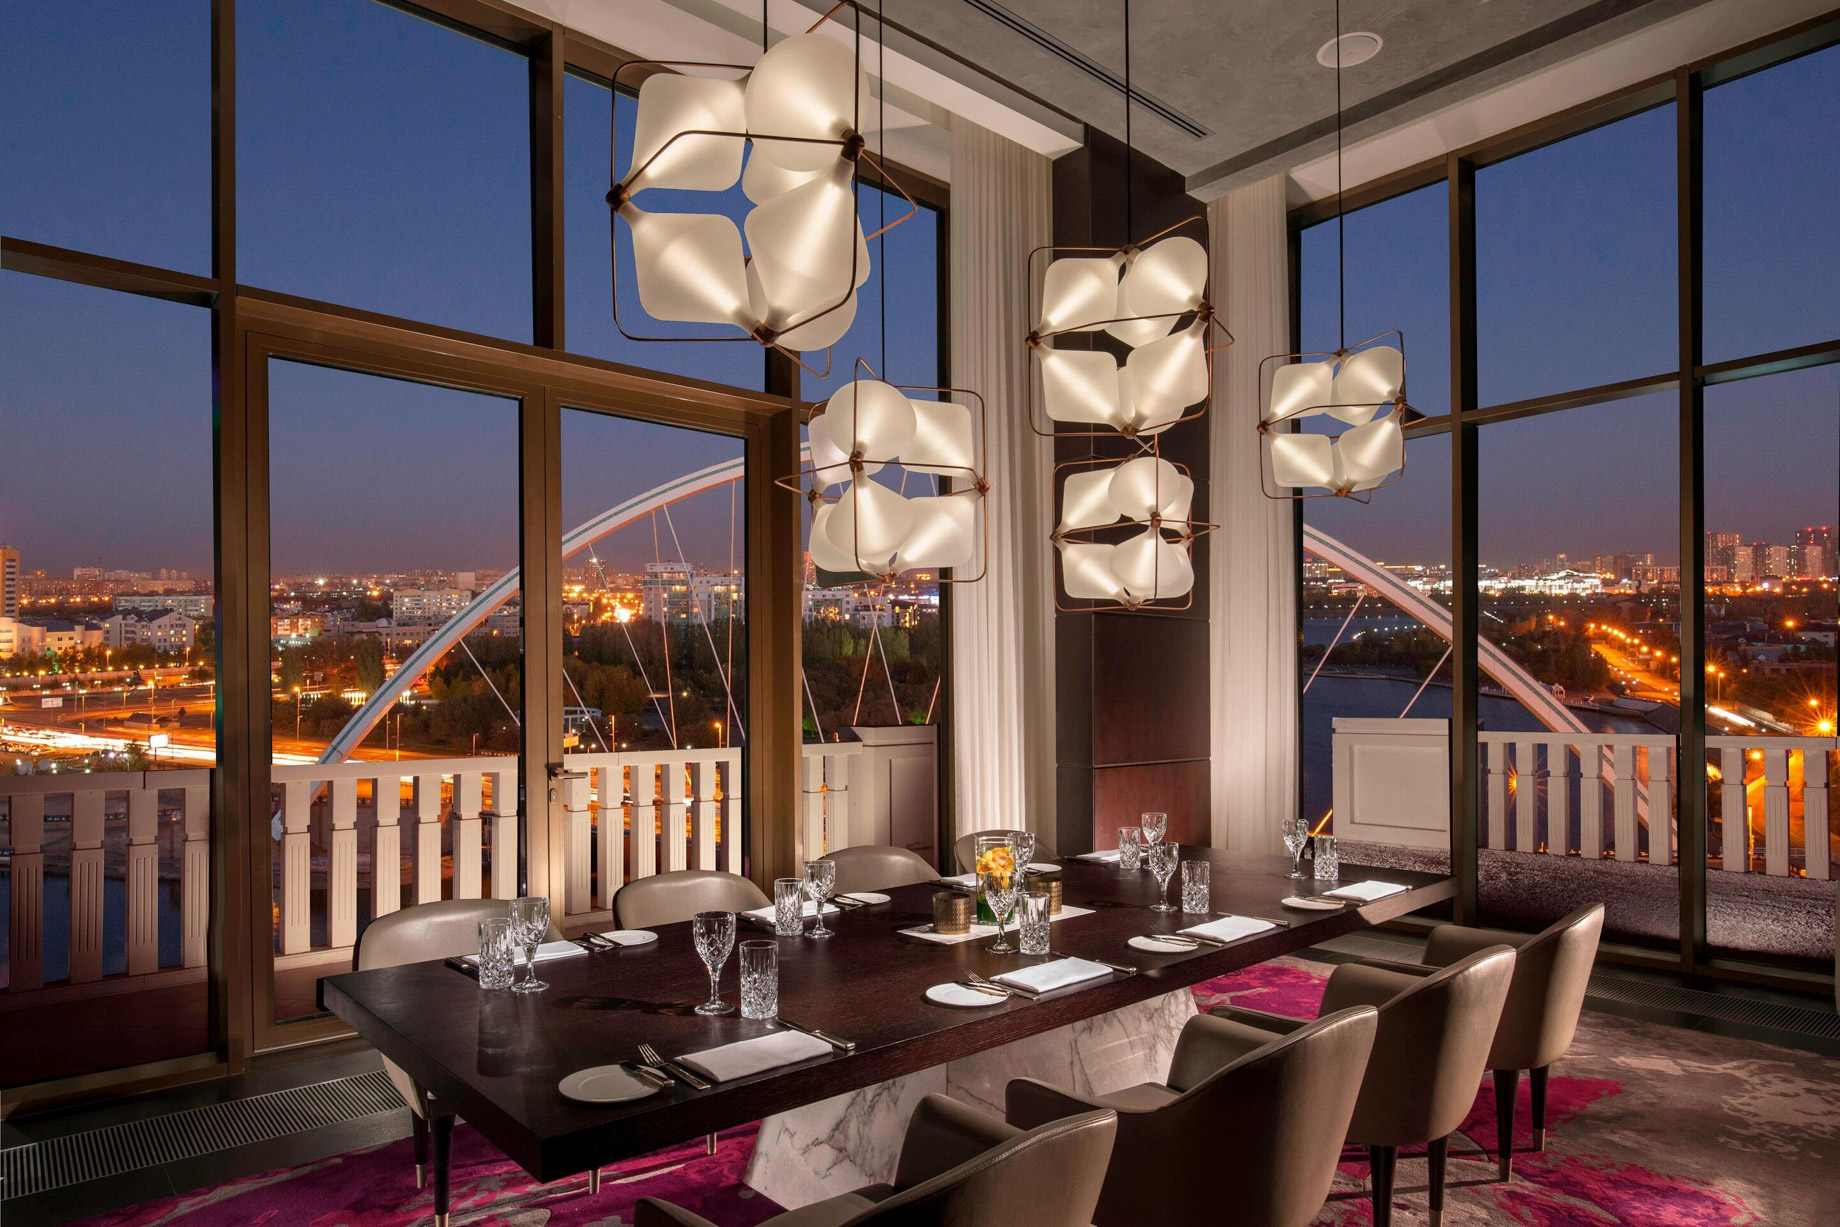 The St. Regis Astana Hotel – Astana, Kazakhstan – The Grill Private Dining Room